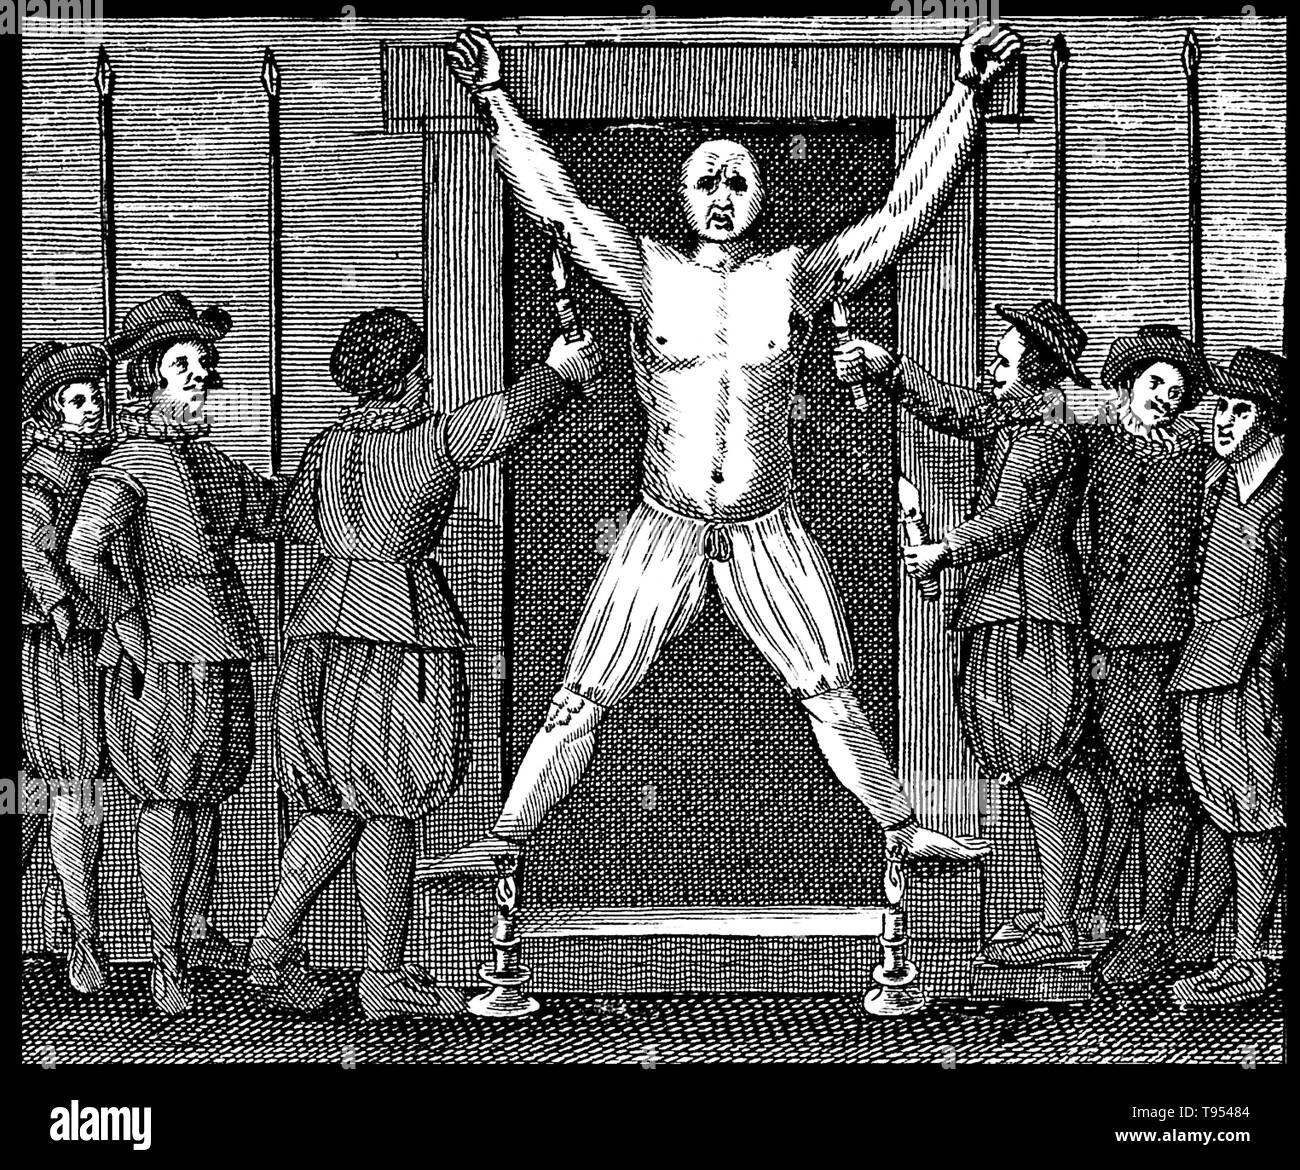 A man tied to a rack has his armpits and the soles of his feet scorched by candles. Medieval and early modern European courts used torture, depending on the crime of the accused and his or her social status. Torture was deemed a legitimate means to extract confessions or other information about a crime, although many confessions were greatly invalid due to the victim being forced to confess under great agony and pressure. Stock Photo